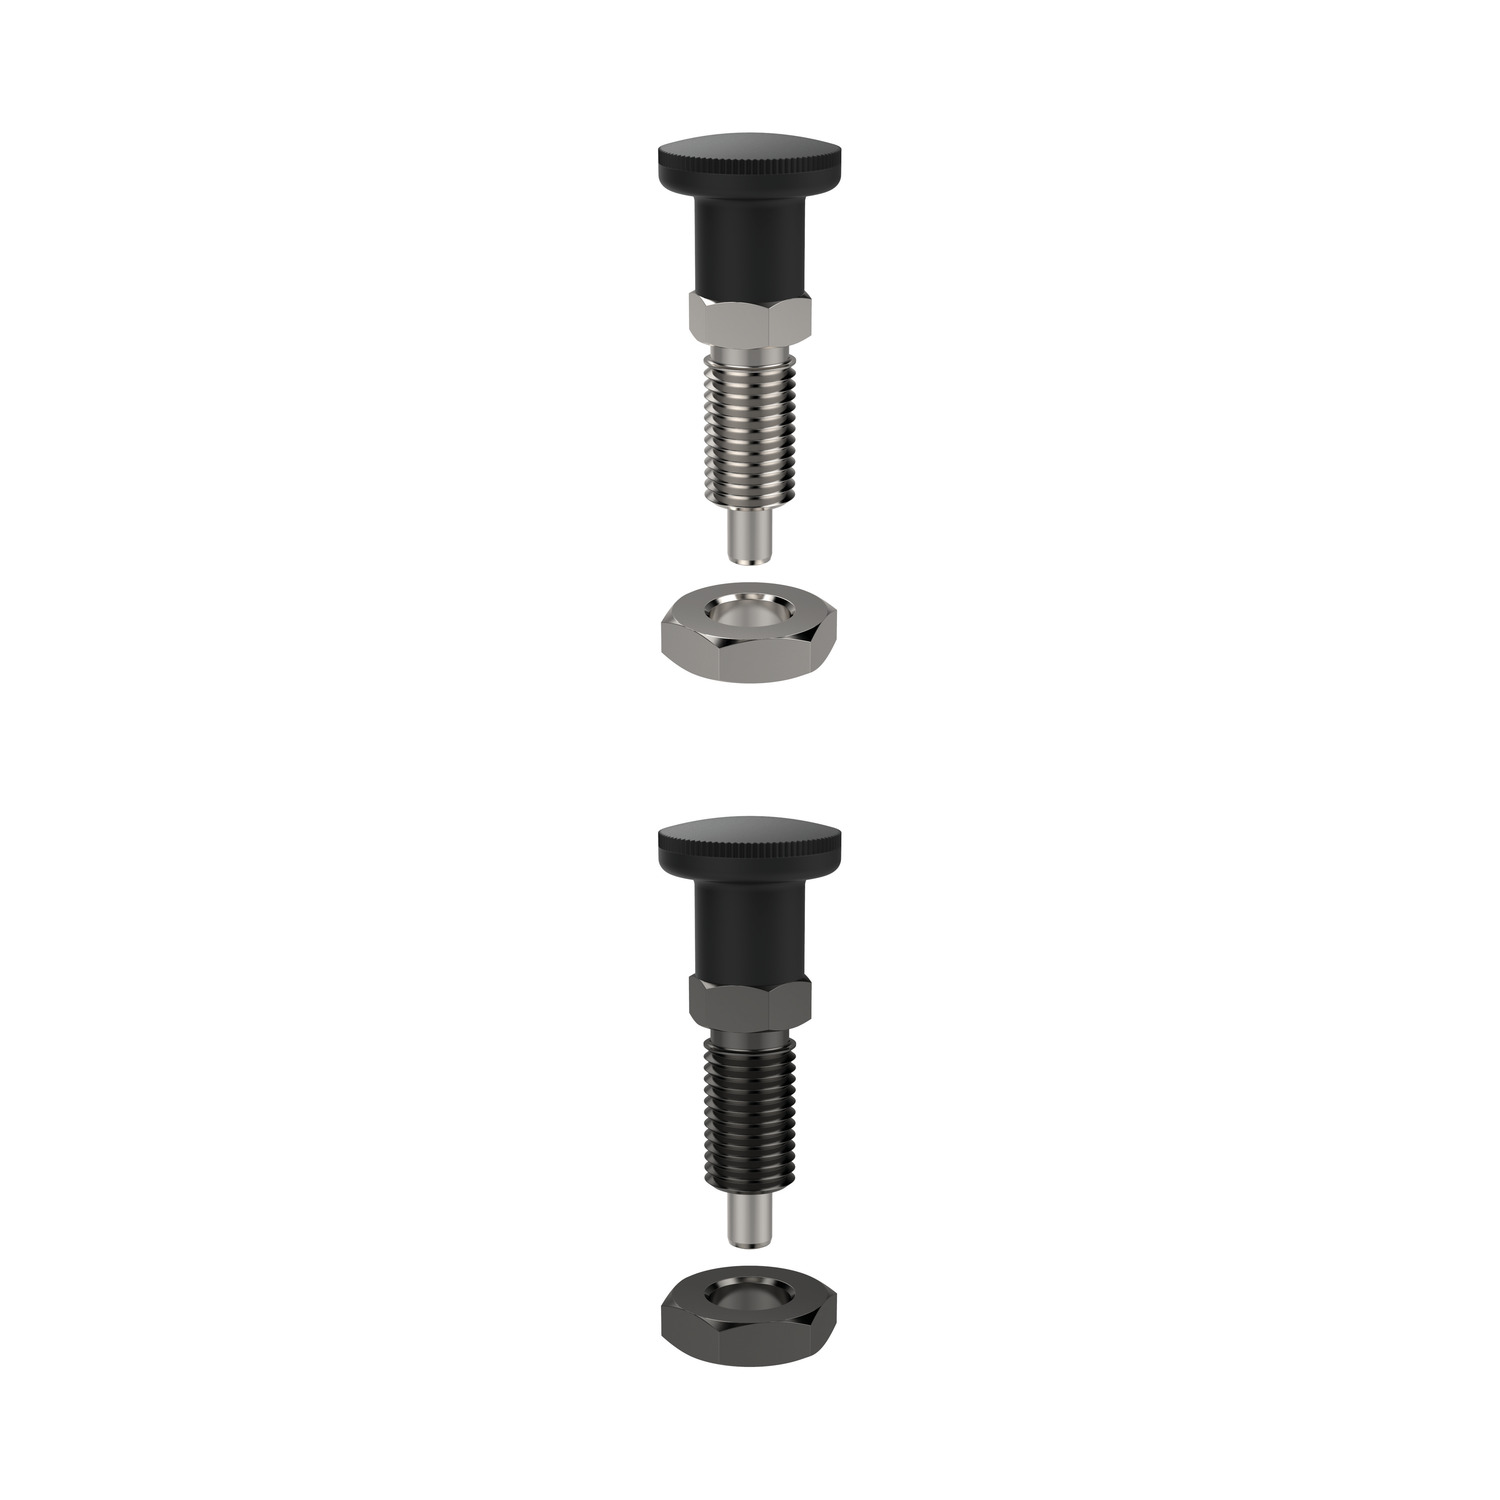 Product 32690, Index Plungers - Compact compact -locking / 